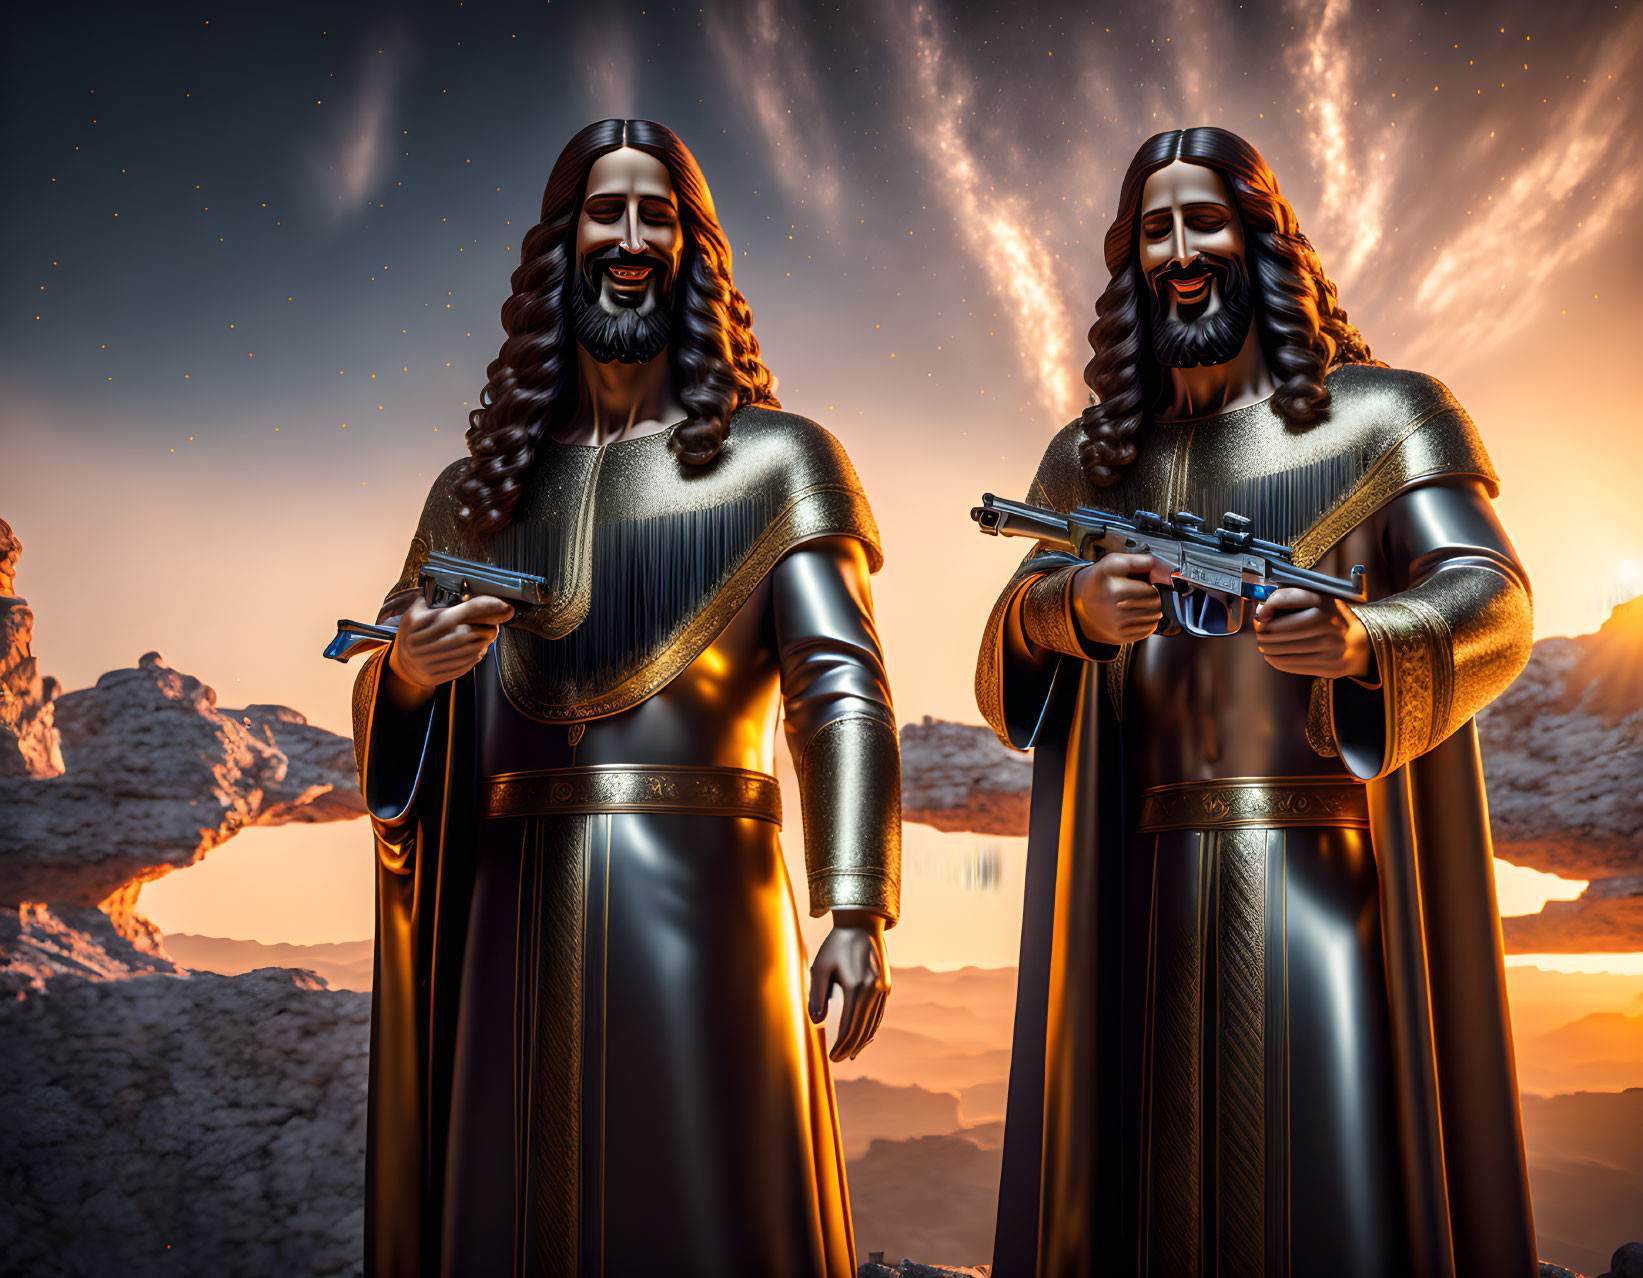 Identical Figures in Armor with Long Hair and Beards Holding Futuristic Weapons